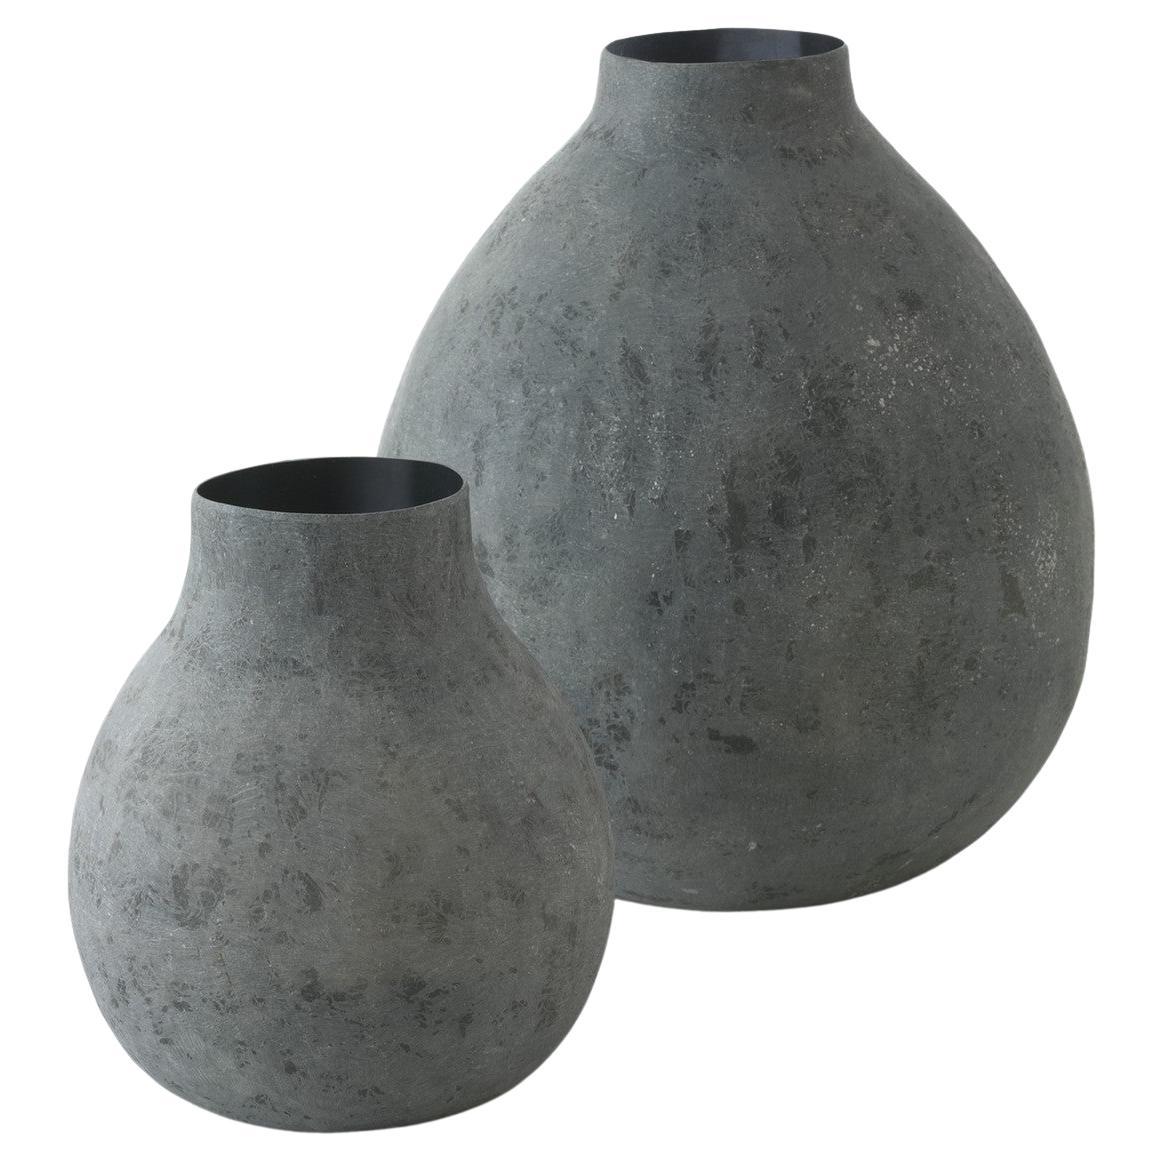 Pair of Bulbo Vases by Imperfettolab